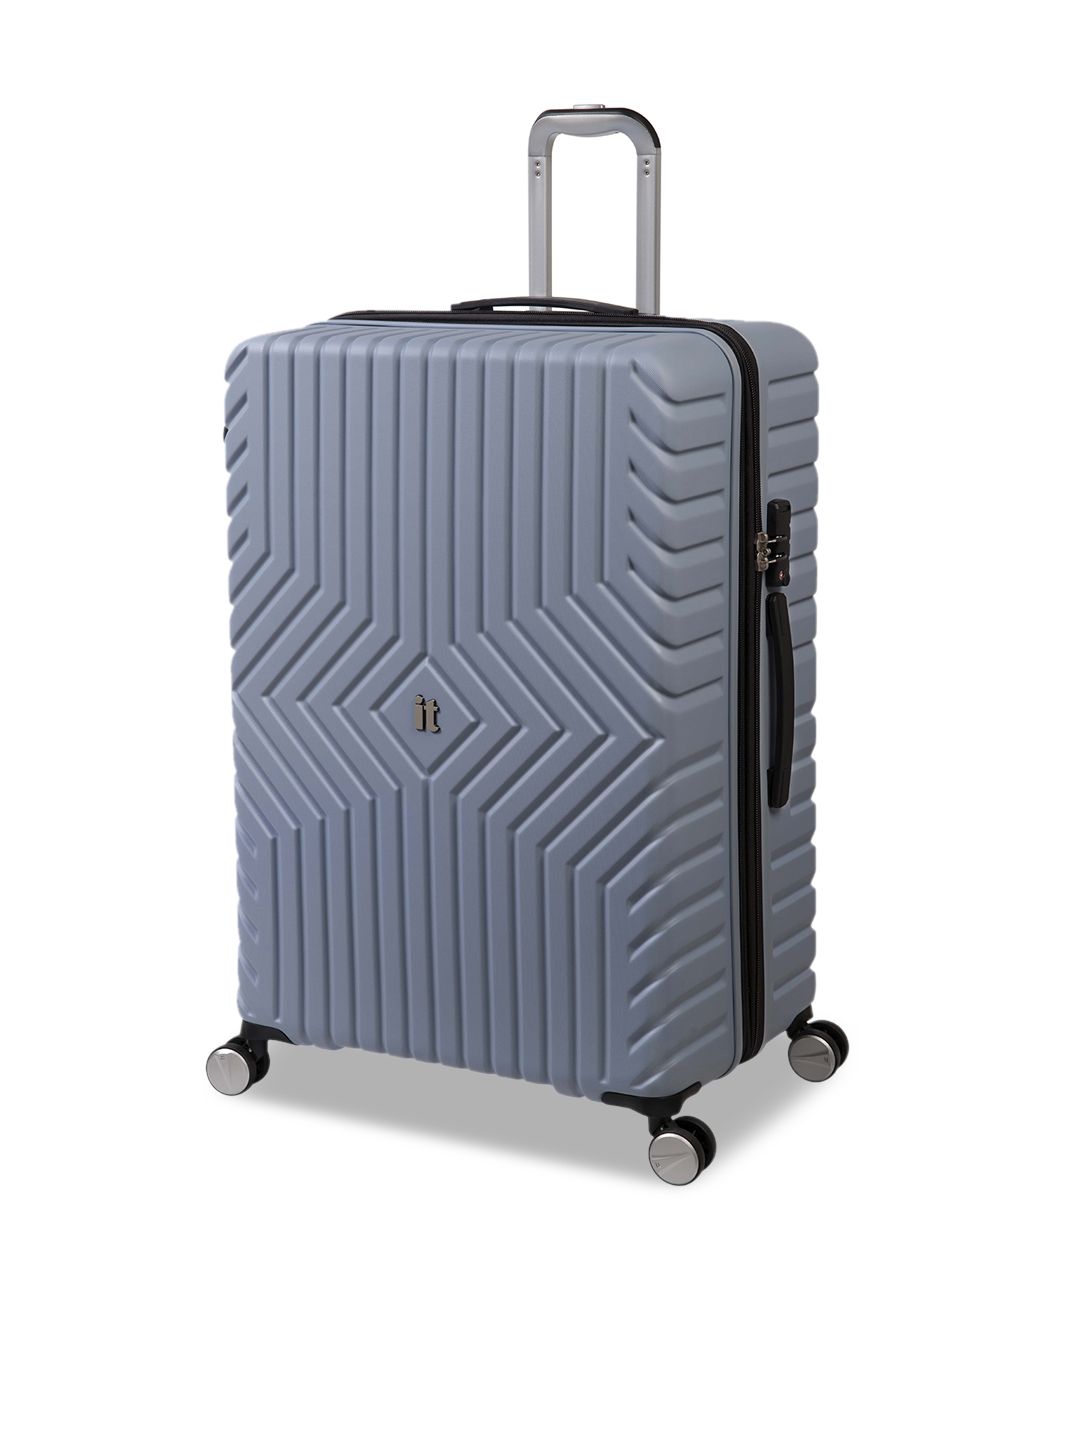 IT luggage Blue Textured Hard-Sided Trolley Suitcases Price in India